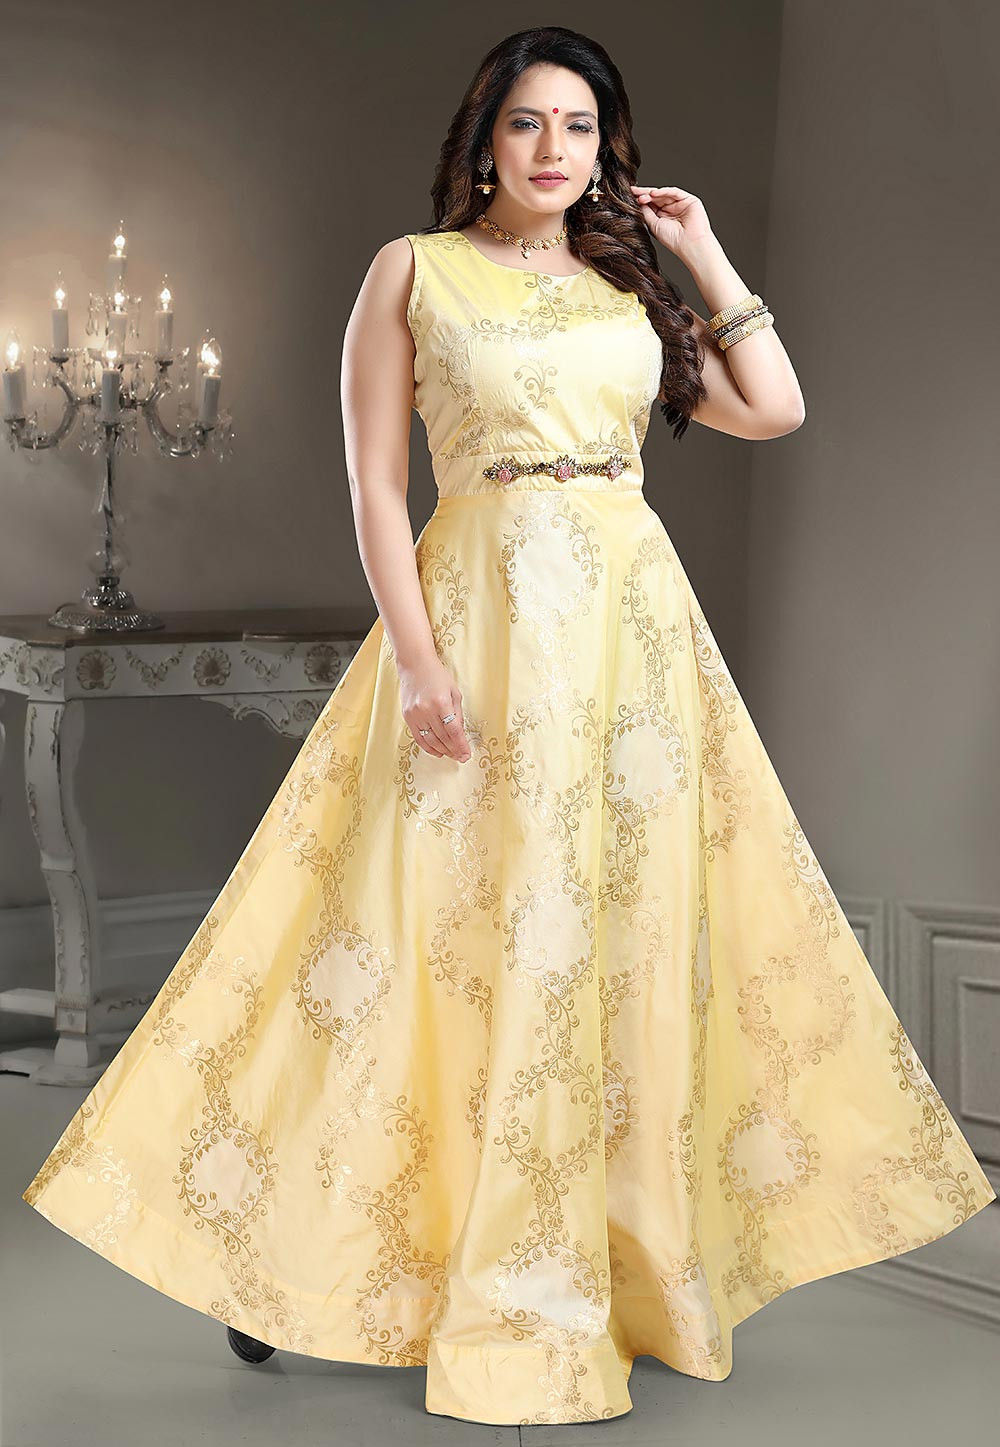 Aggregate 83+ bright yellow gown super hot